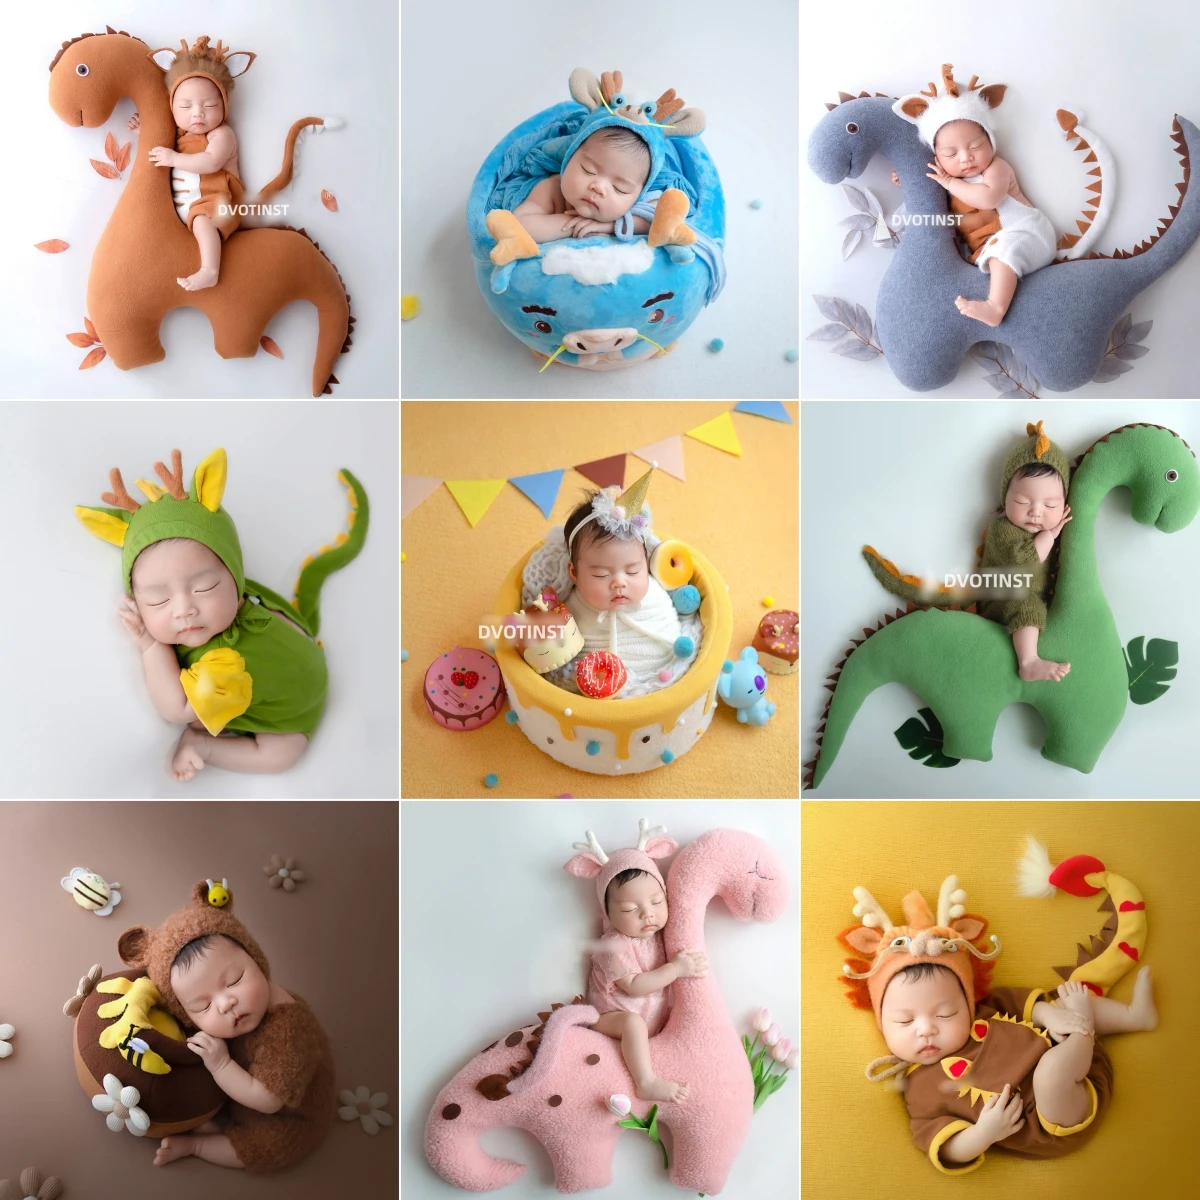 Dvotinst Newborn Photography Props for Baby Creative Posing Dinosaur Cute Animals Outfit Studio Shooting Accessories Photo Props dvotinst newborn photography props for baby creative posing dinosaur cute animals outfit studio shooting accessories photo props